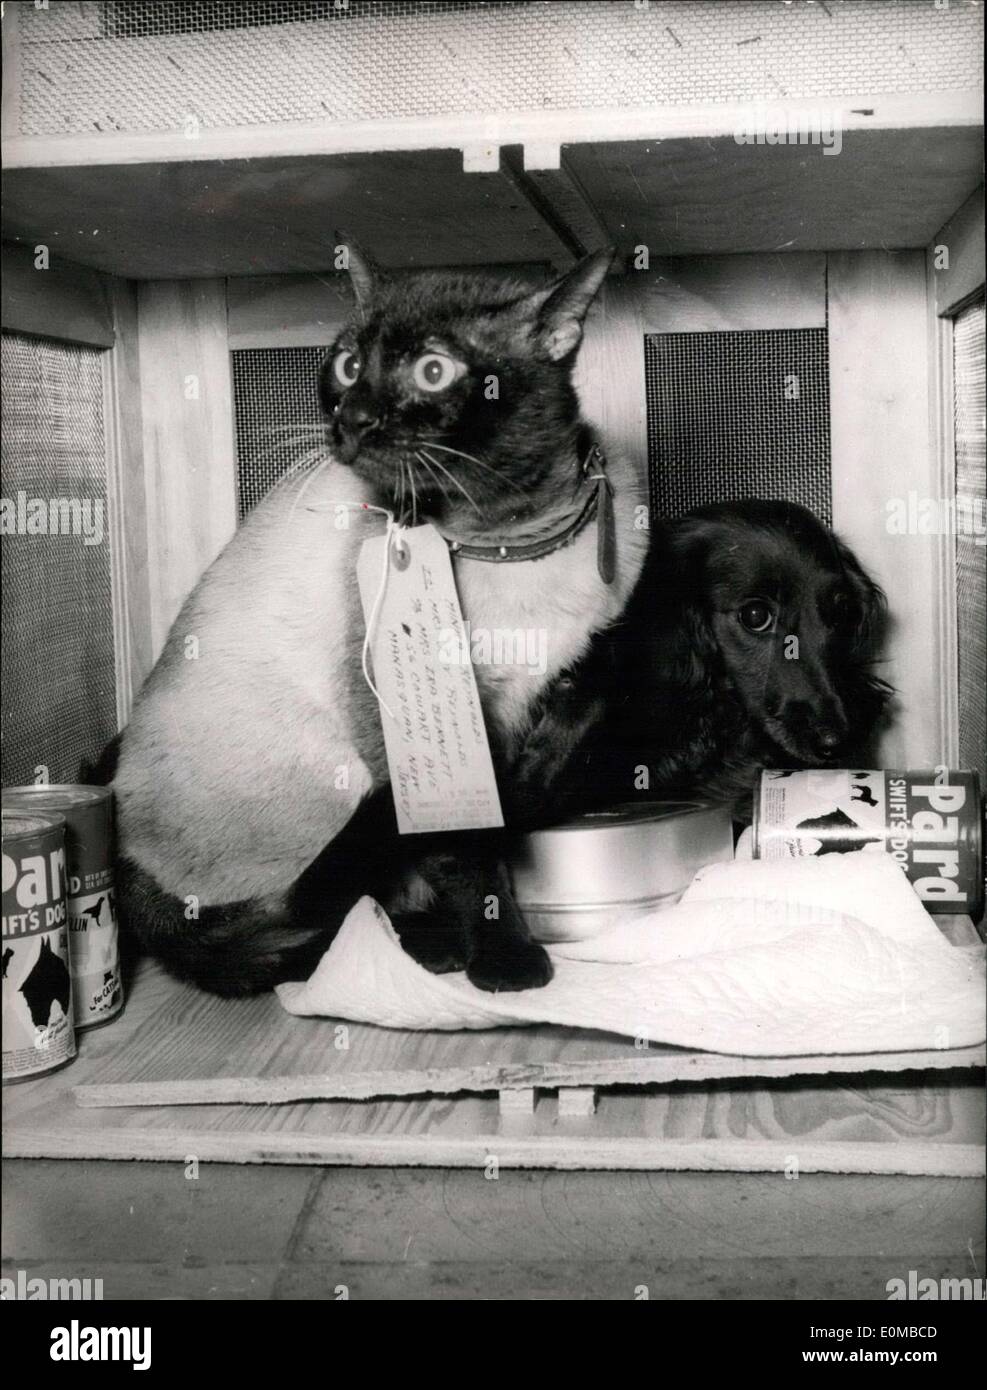 Jun. 03, 1954 - Only a fellow-traveler: Not like dog and cat but as friendly fellow travelers the cat Miezi and the dog Doxy left in freight-box the airport of Munich-riem for New York Stock Photo